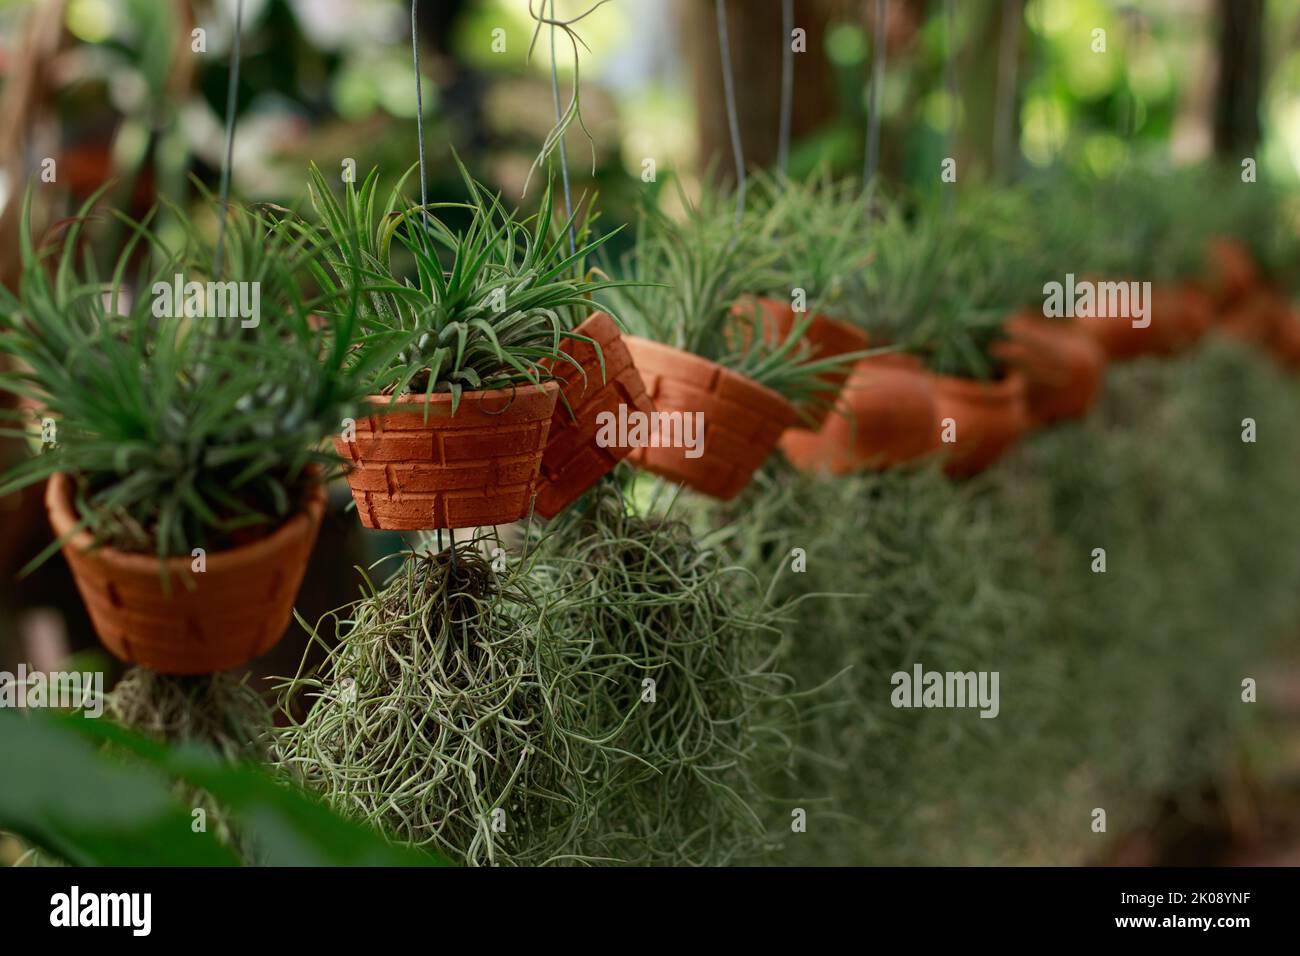 Tillandsia baileyi or airplant and airplant moss or spanish moss in hanging pots Stock Photo